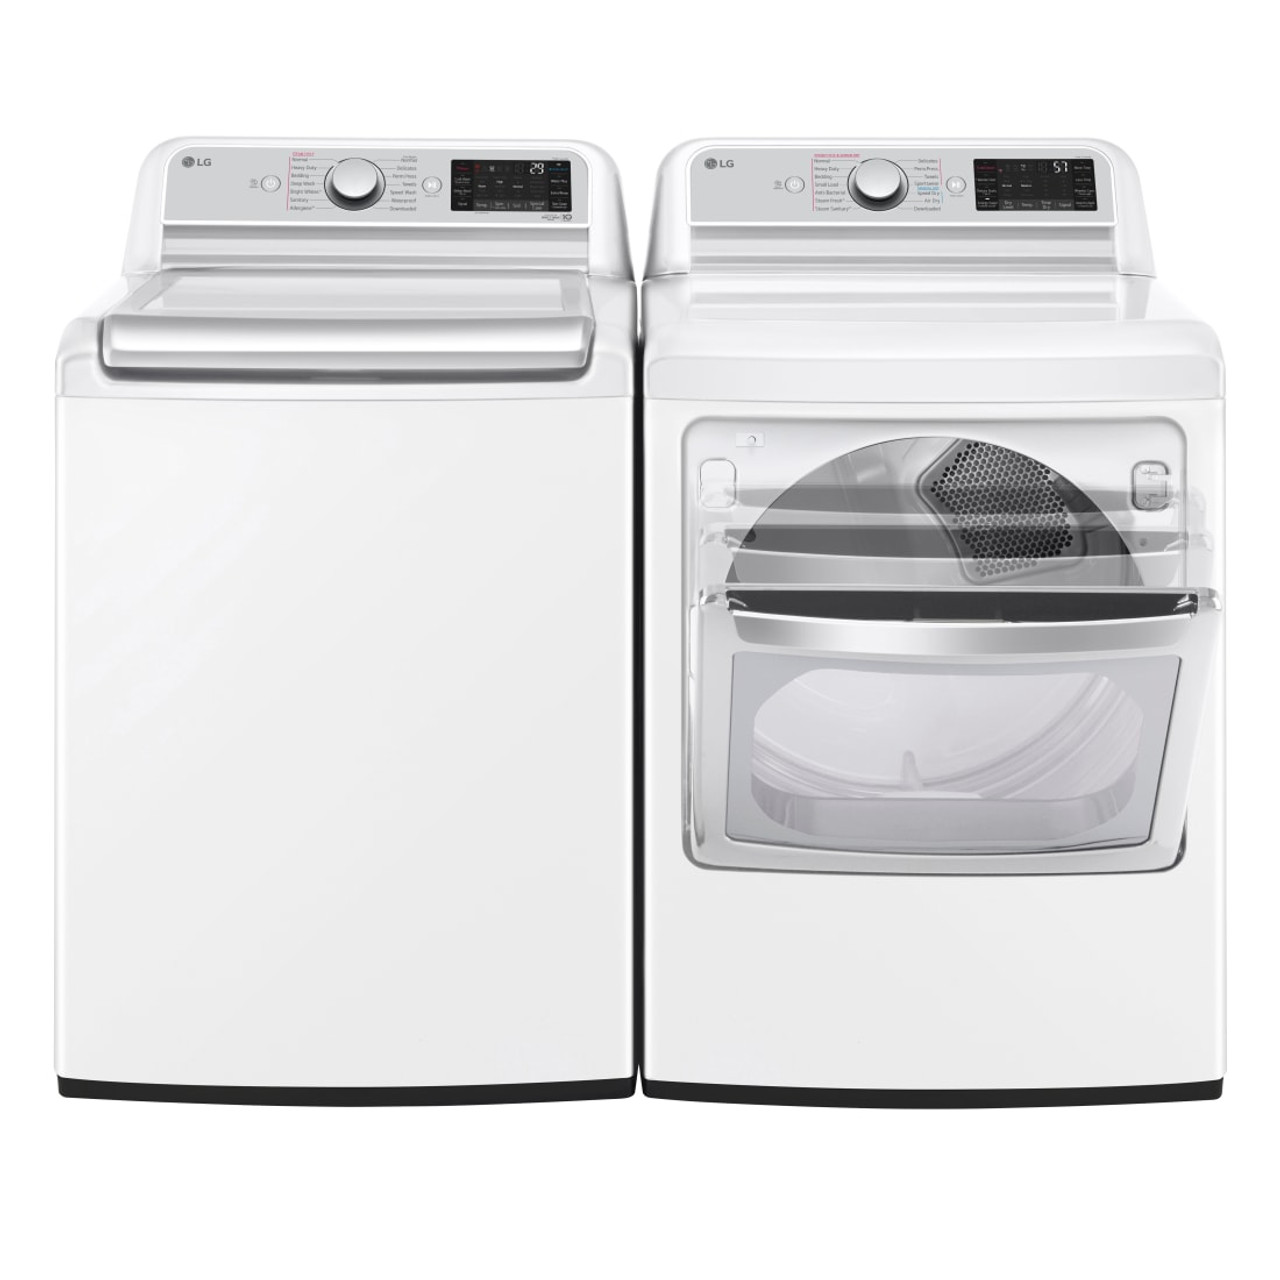 LG 7.3 cu. ft. Ultra Large Capacity Smart Wi-Fi Enabled Rear Control Gas Dryer with TurboSteam - DLGX7901WE